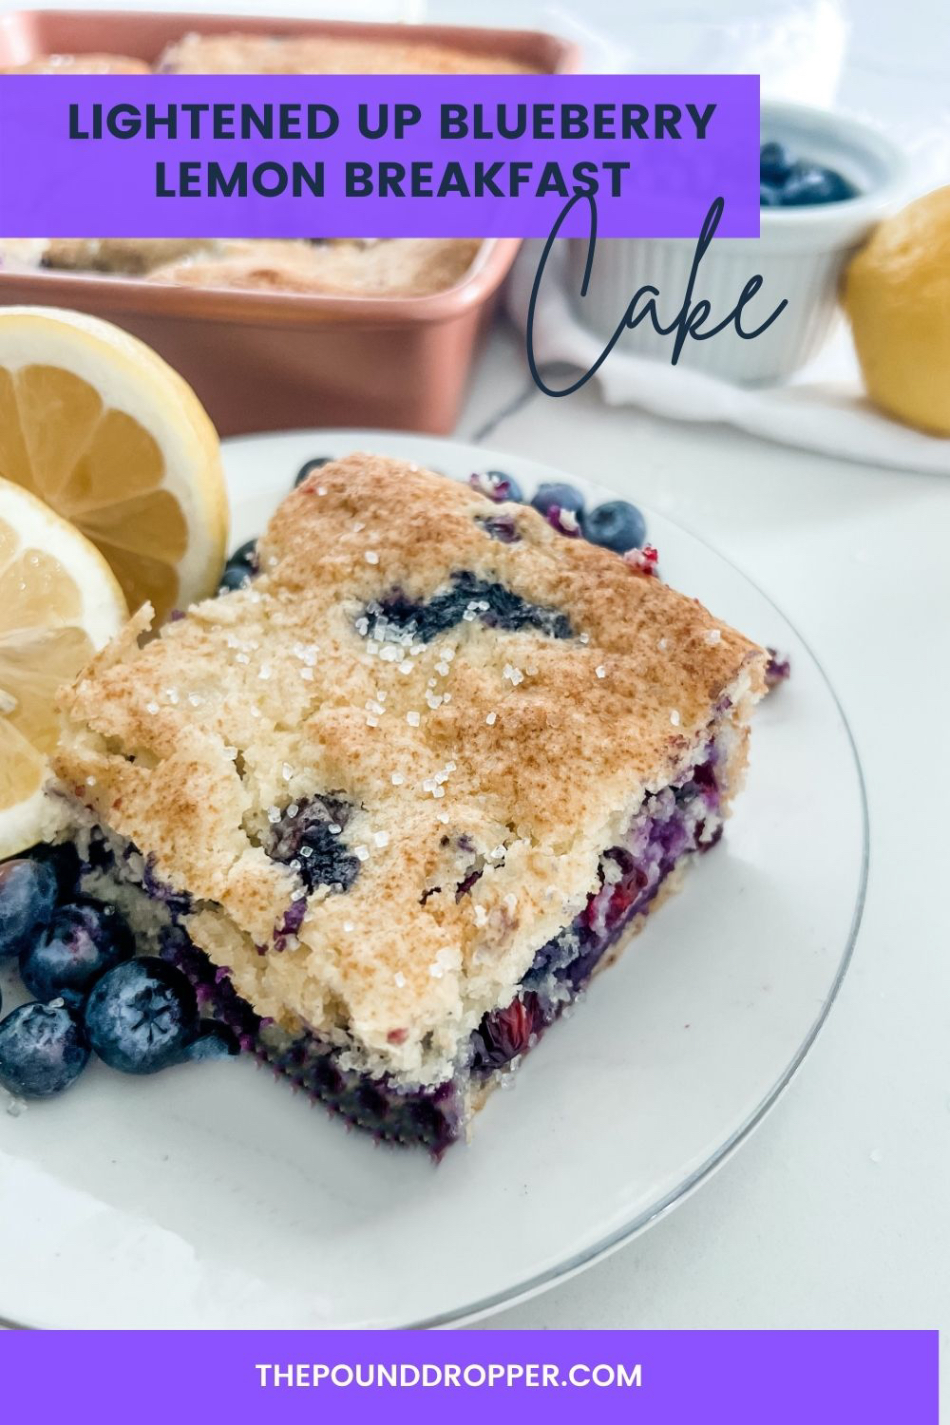 These Lightened Up Blueberry Lemon Breakfast Cake Squares make for the most delicious breakfast-filled with protein packed pancake mix, fresh juicy blueberries, lemon zest and juice-this is a breakfast cake the whole family will enjoy!  via @pounddropper